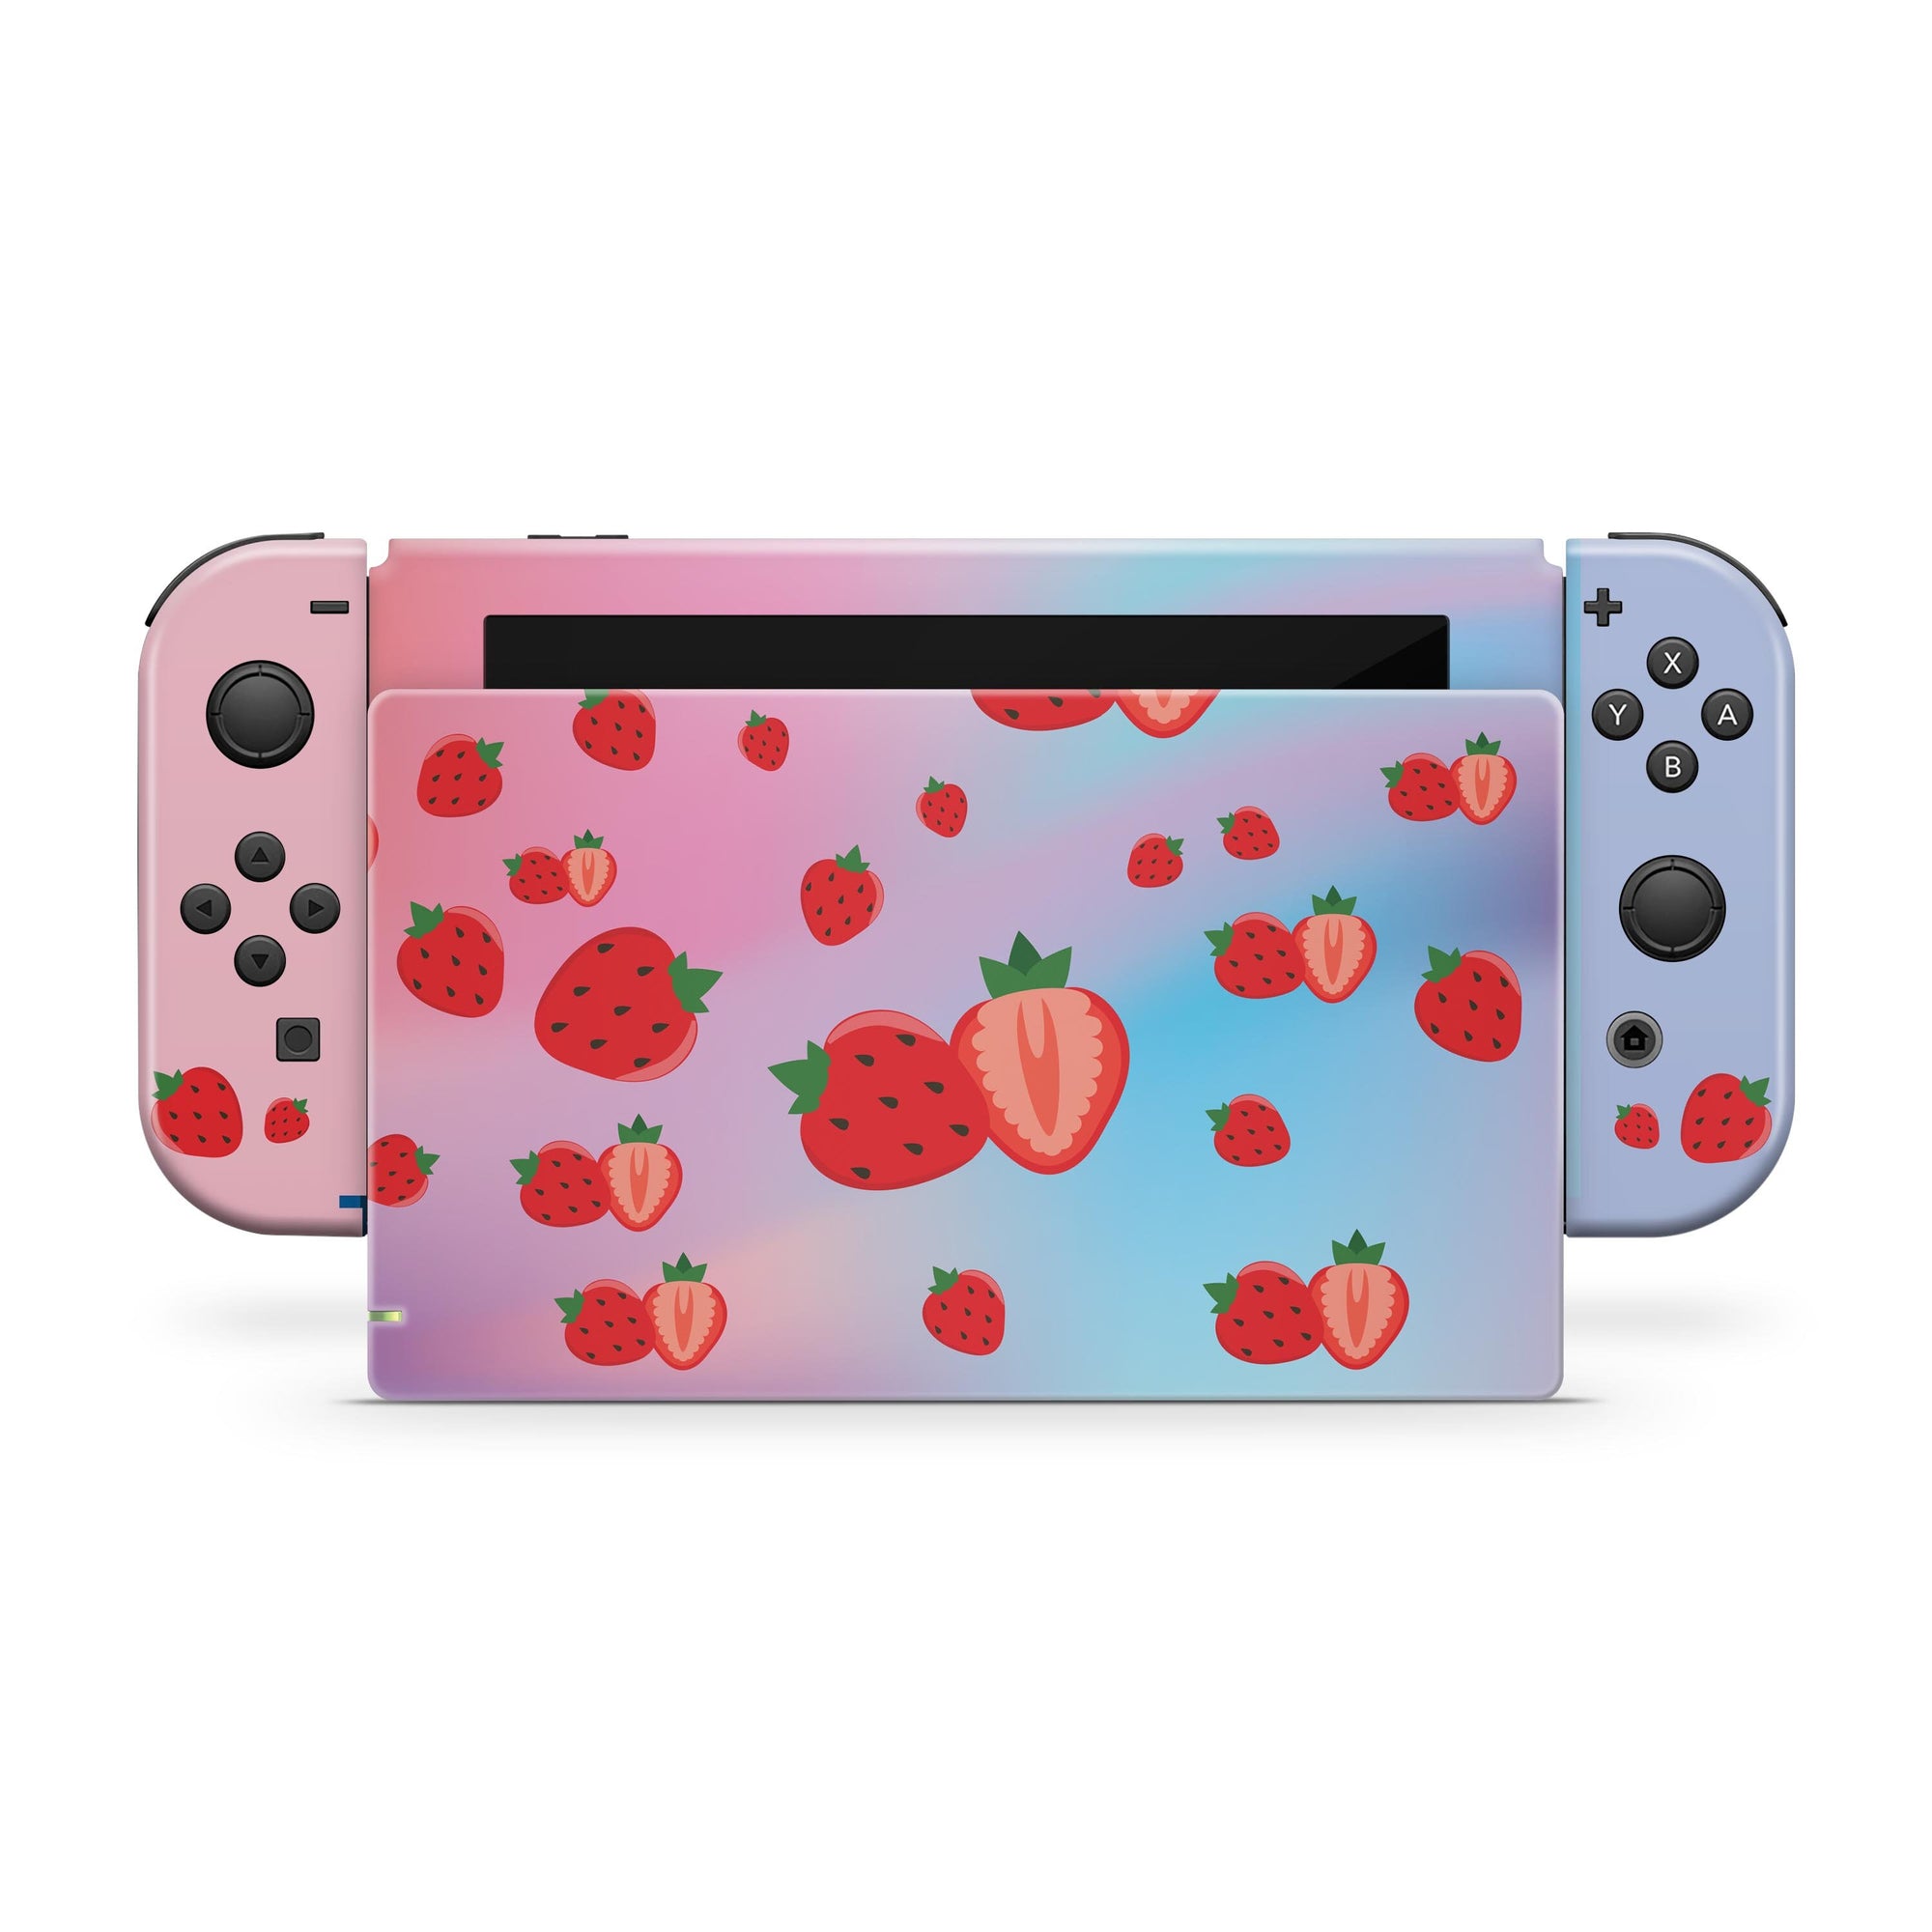 Nintendo Switches skin Cute strawberry, Pink blue switch skin Full cover 3m